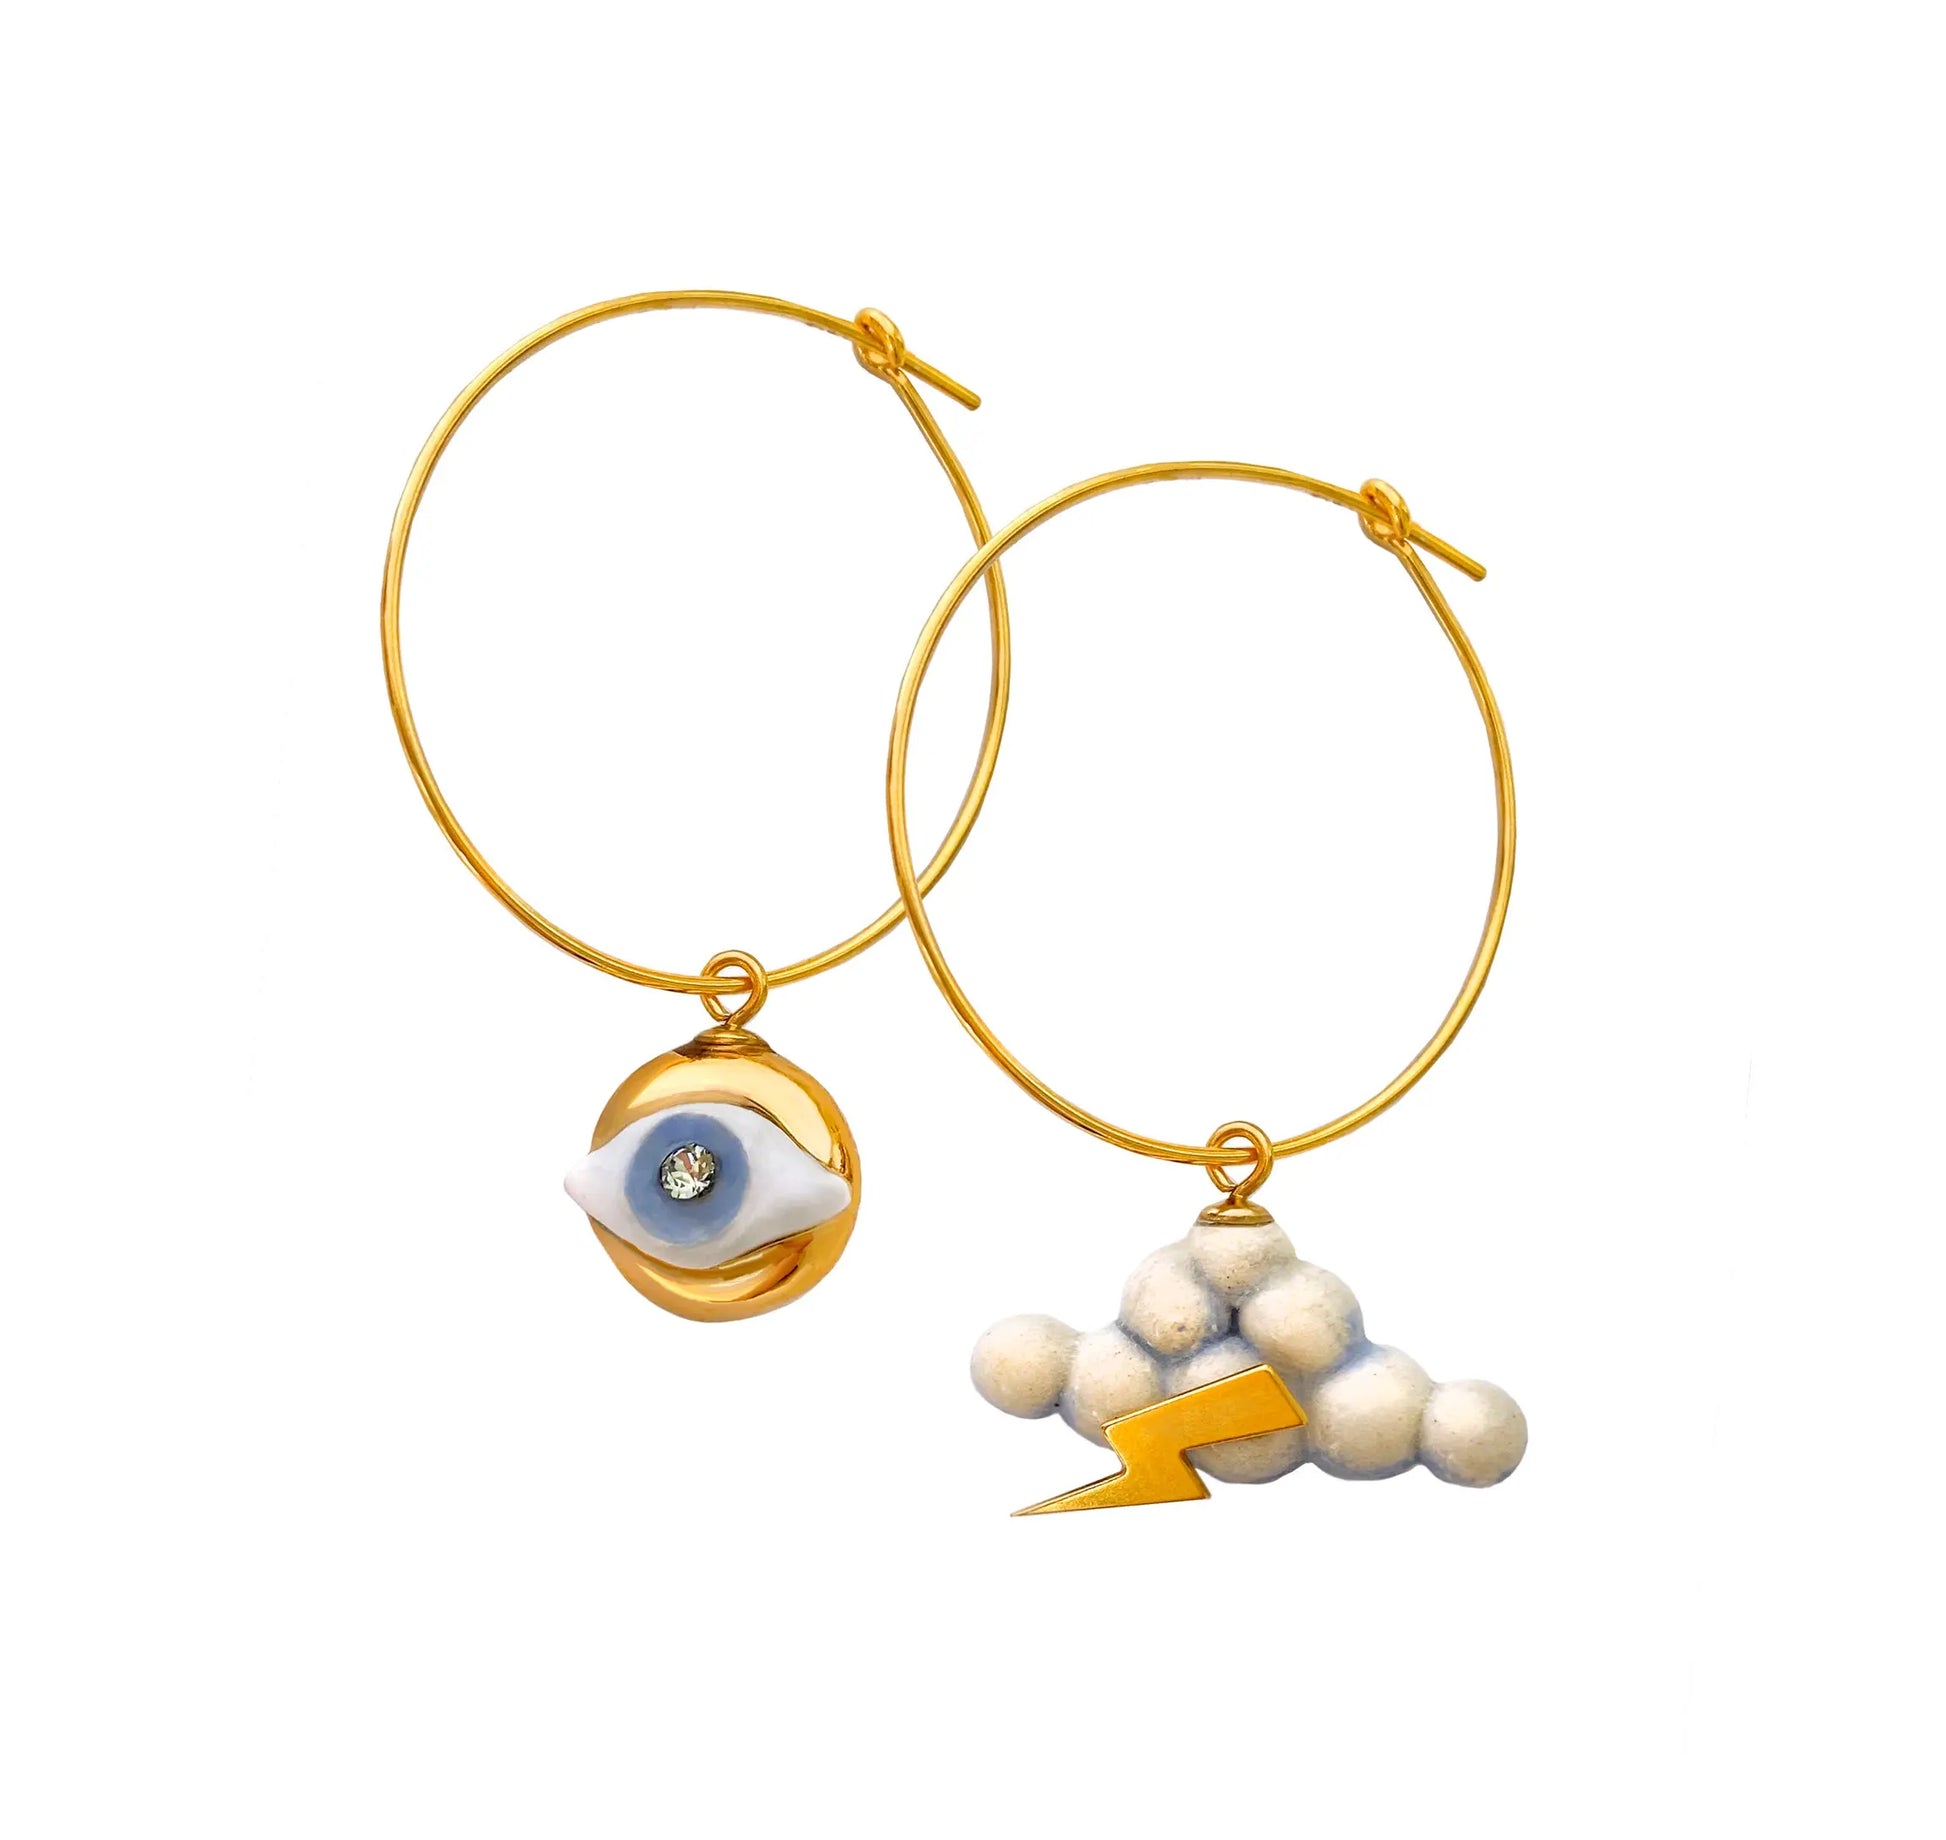 Eye in the Sky - Hand-made ceramic earrings with 24K gold lustre, featuring a protective Eye of Protection charm on gold-over-sterling silver hoops. Unique variations may occur.